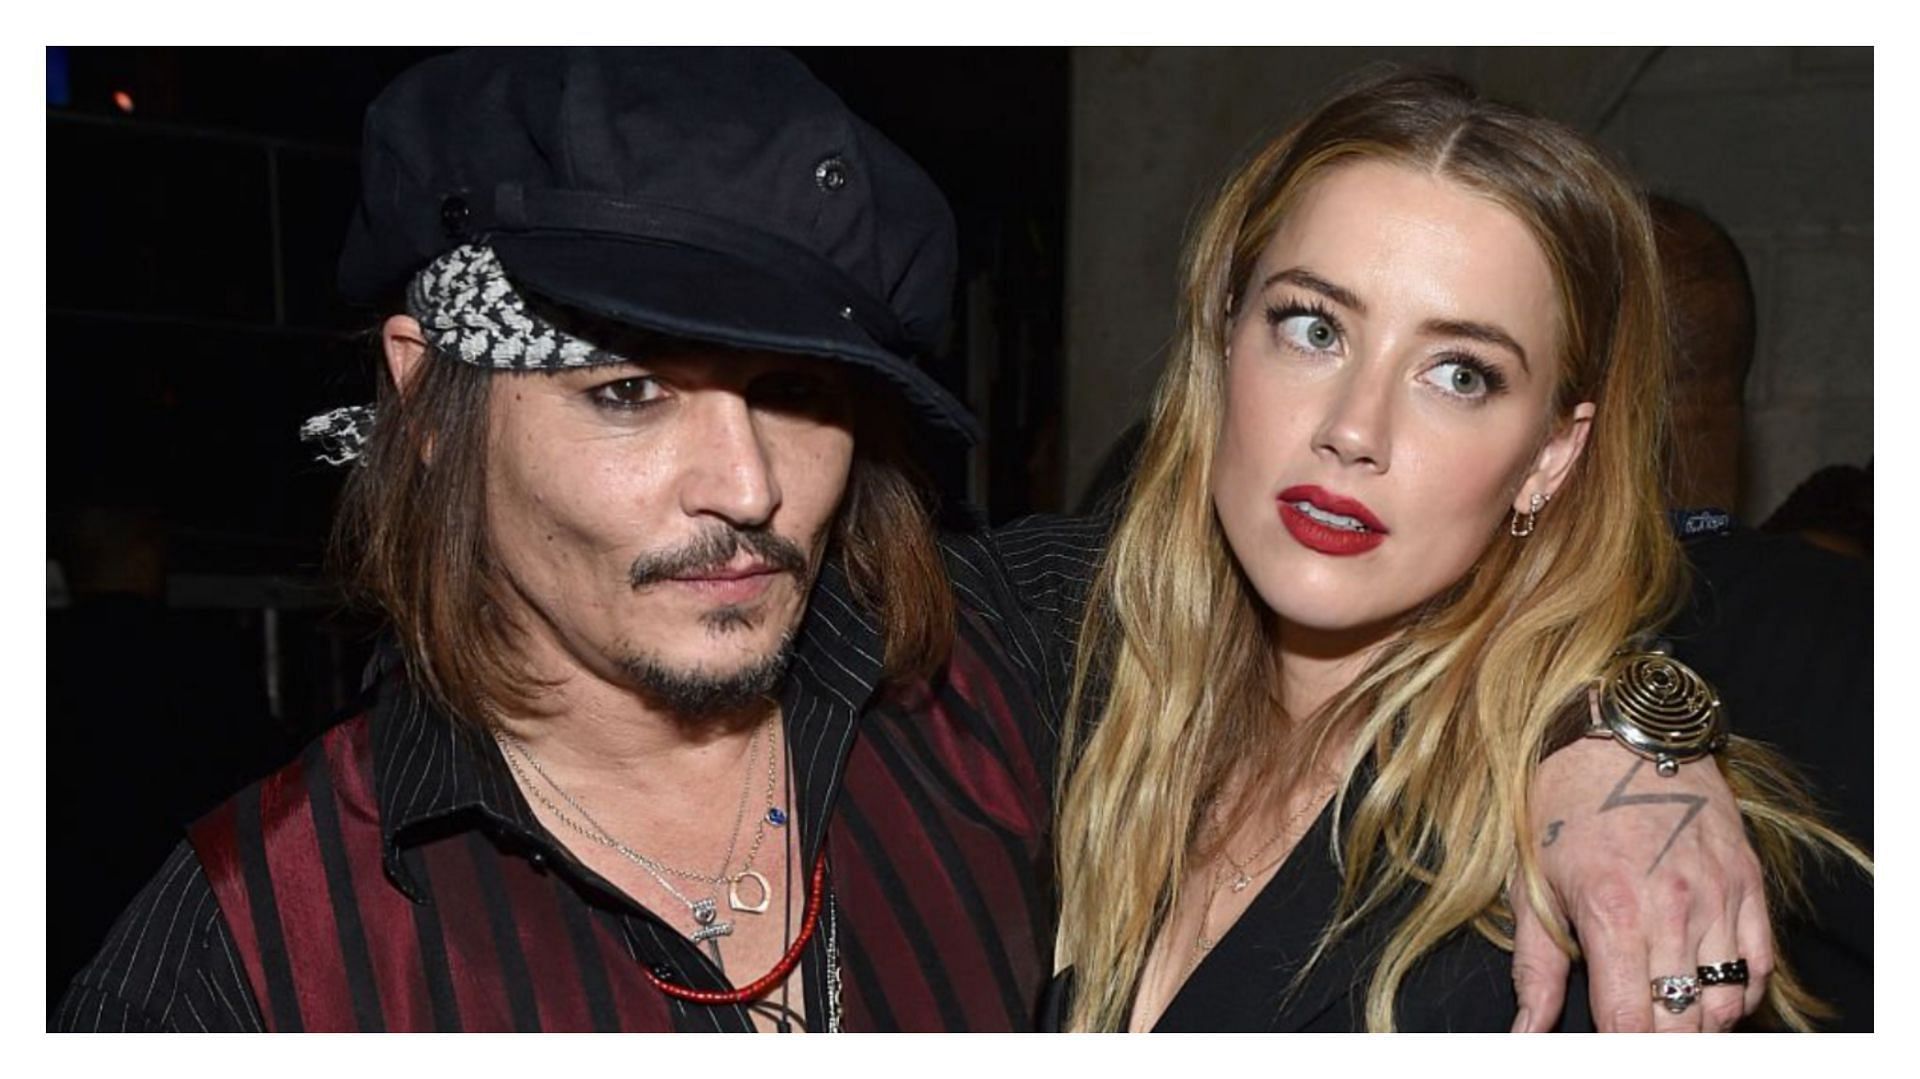 Johnny Depp won the defamation case against his ex-wife on June 1, 2022 (Image via John Shearer/Getty Images)